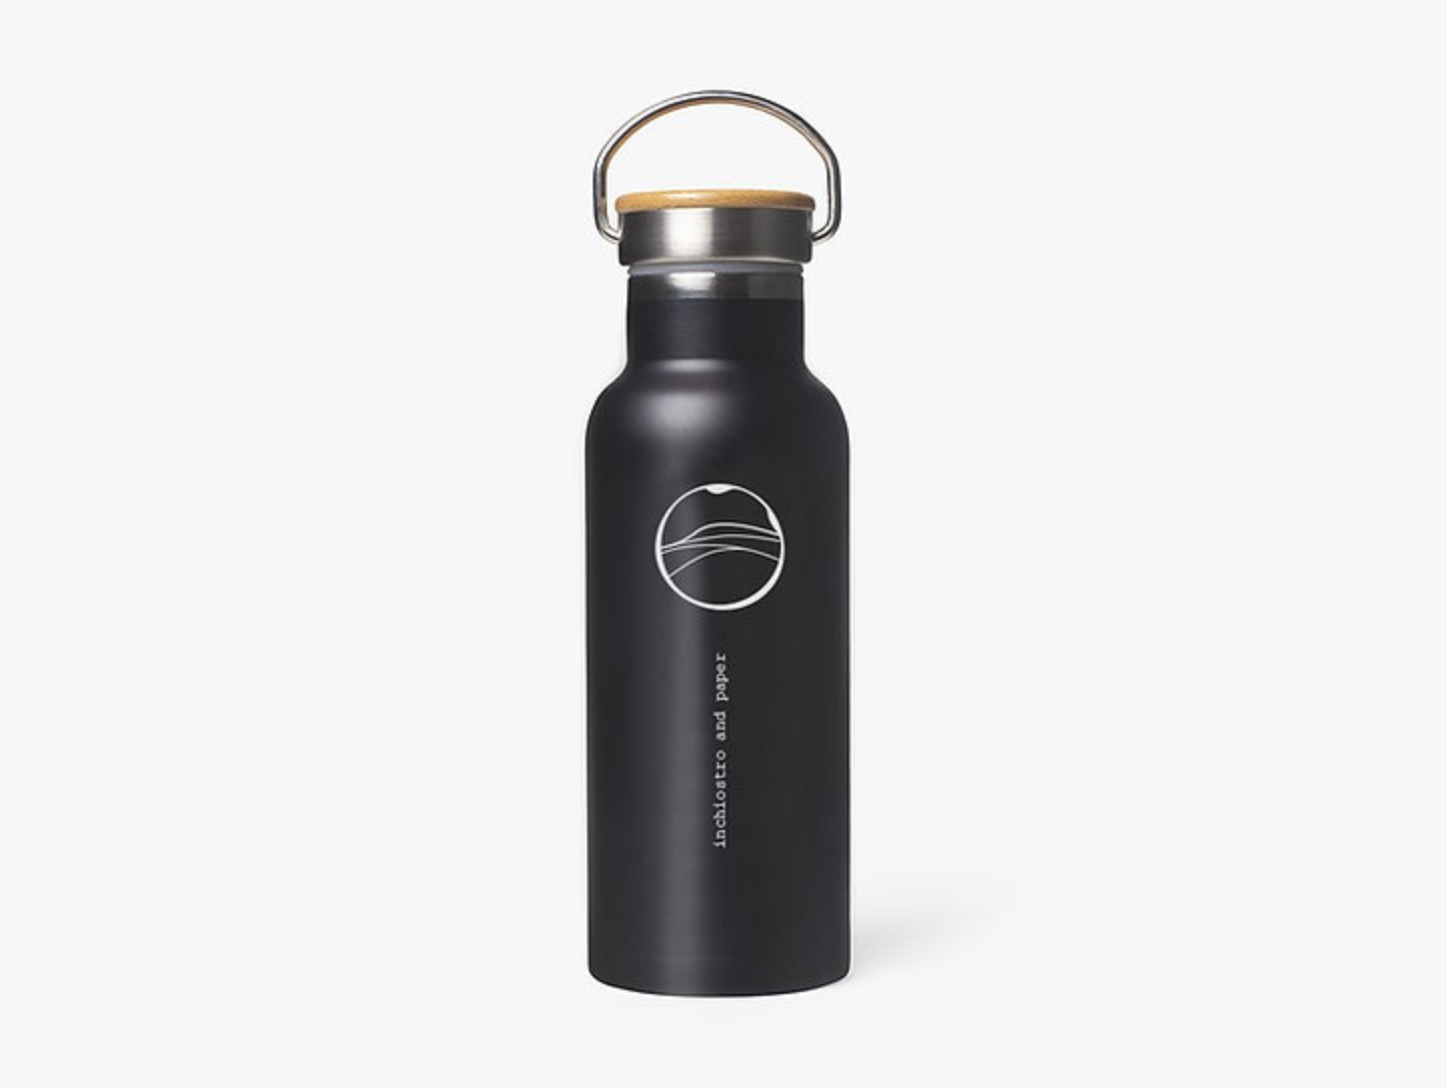 Refillable Bottle - Inchiostro and Paper